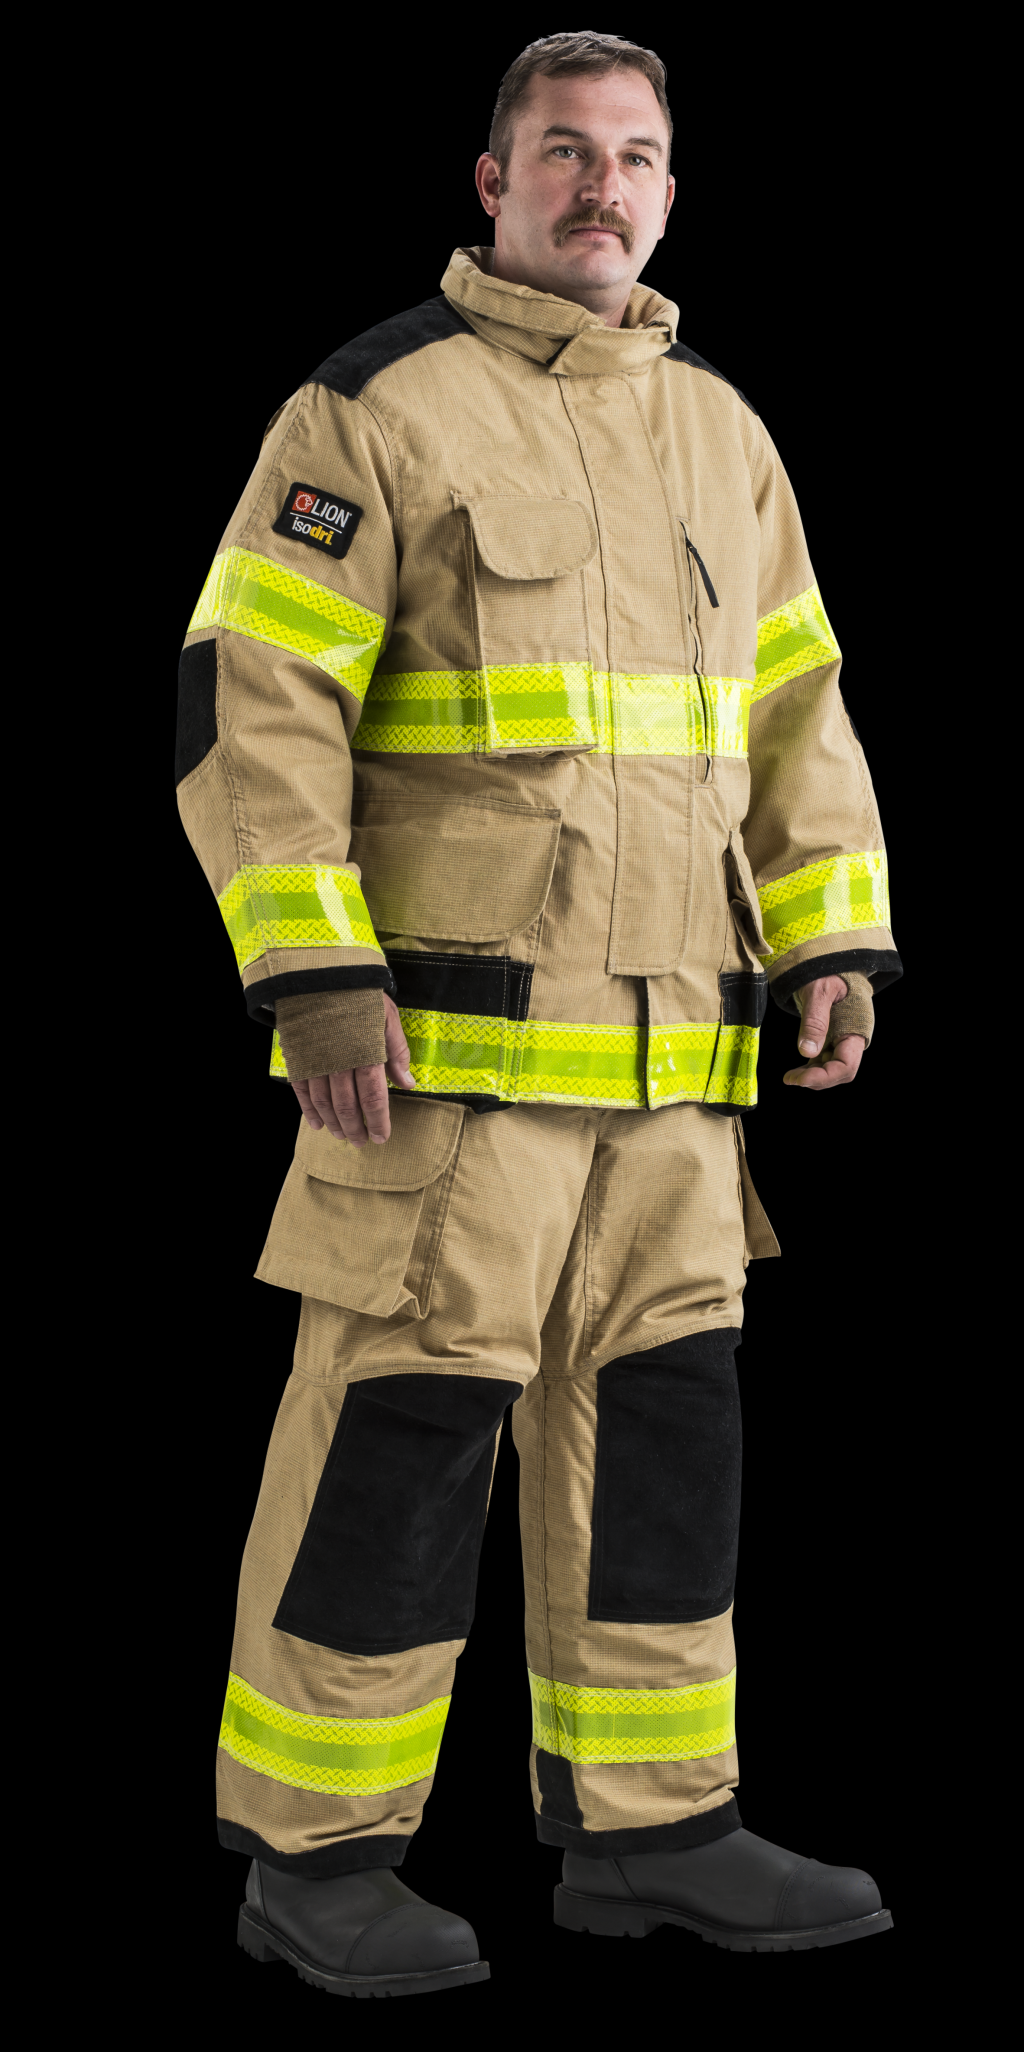 Picture of: Lion  Super-Deluxe Turnout Gear  Coat and Pant Set  Dinges Fire